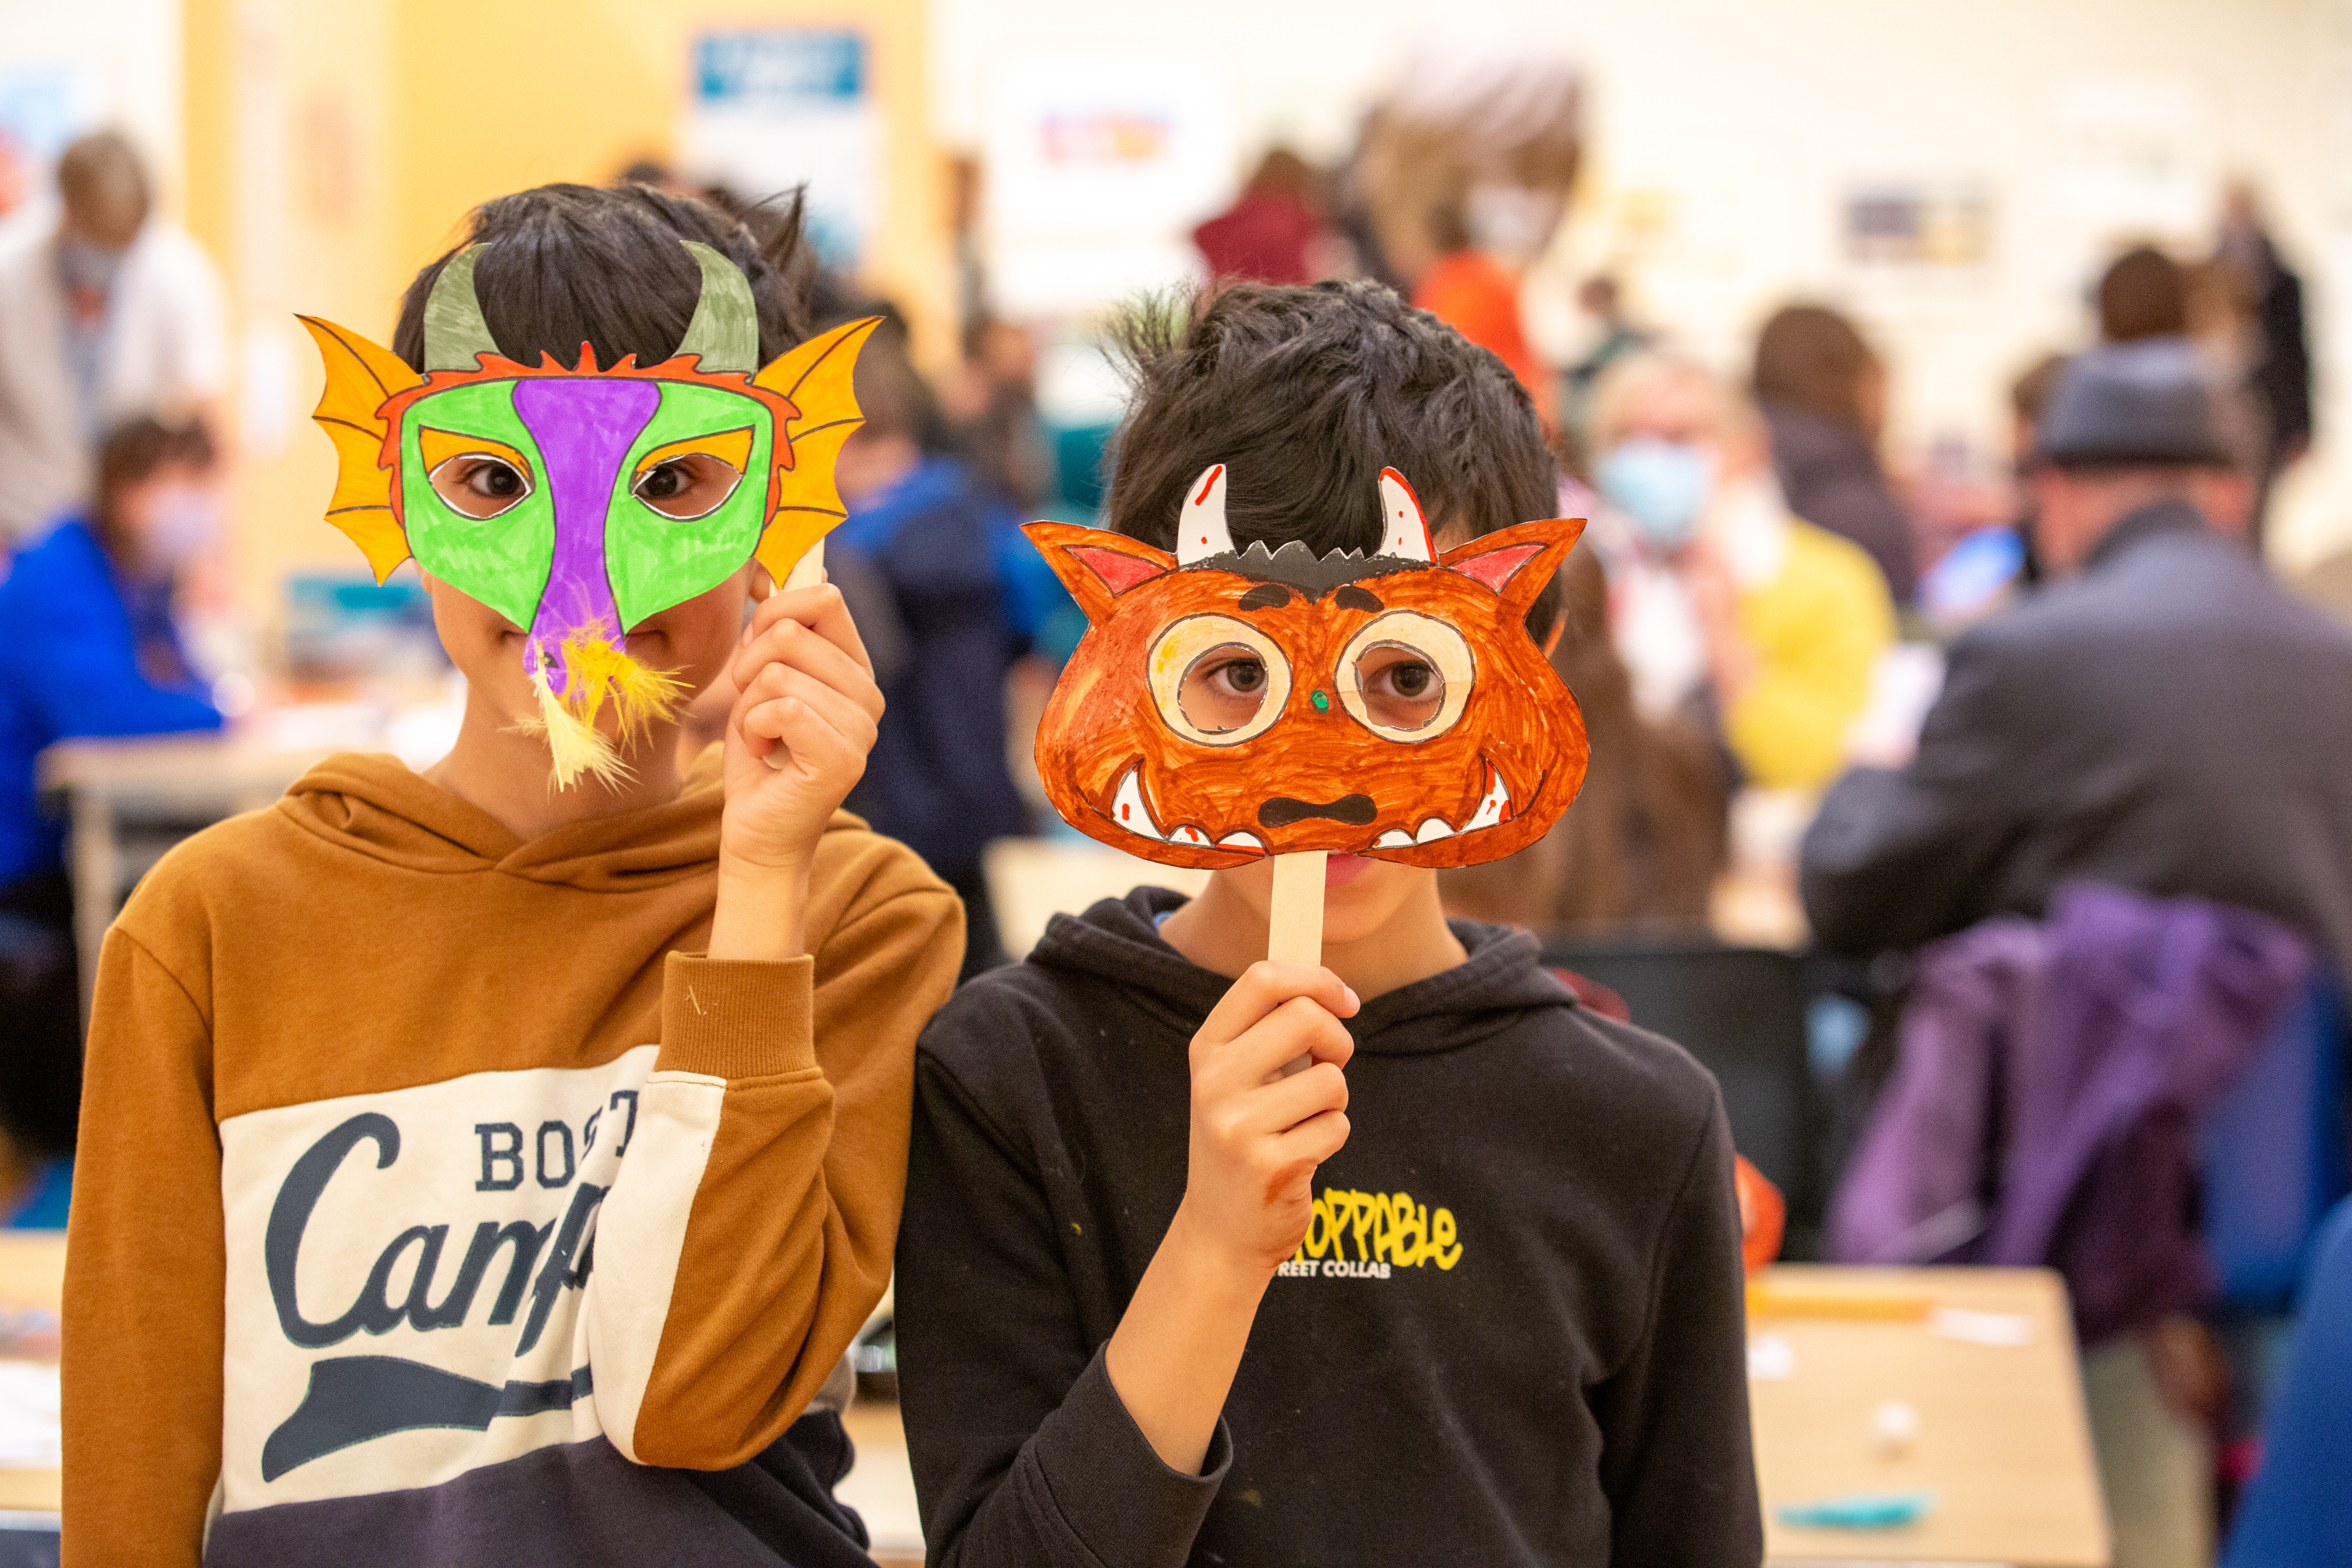 Image: Children wearing masks they created at a craft activity